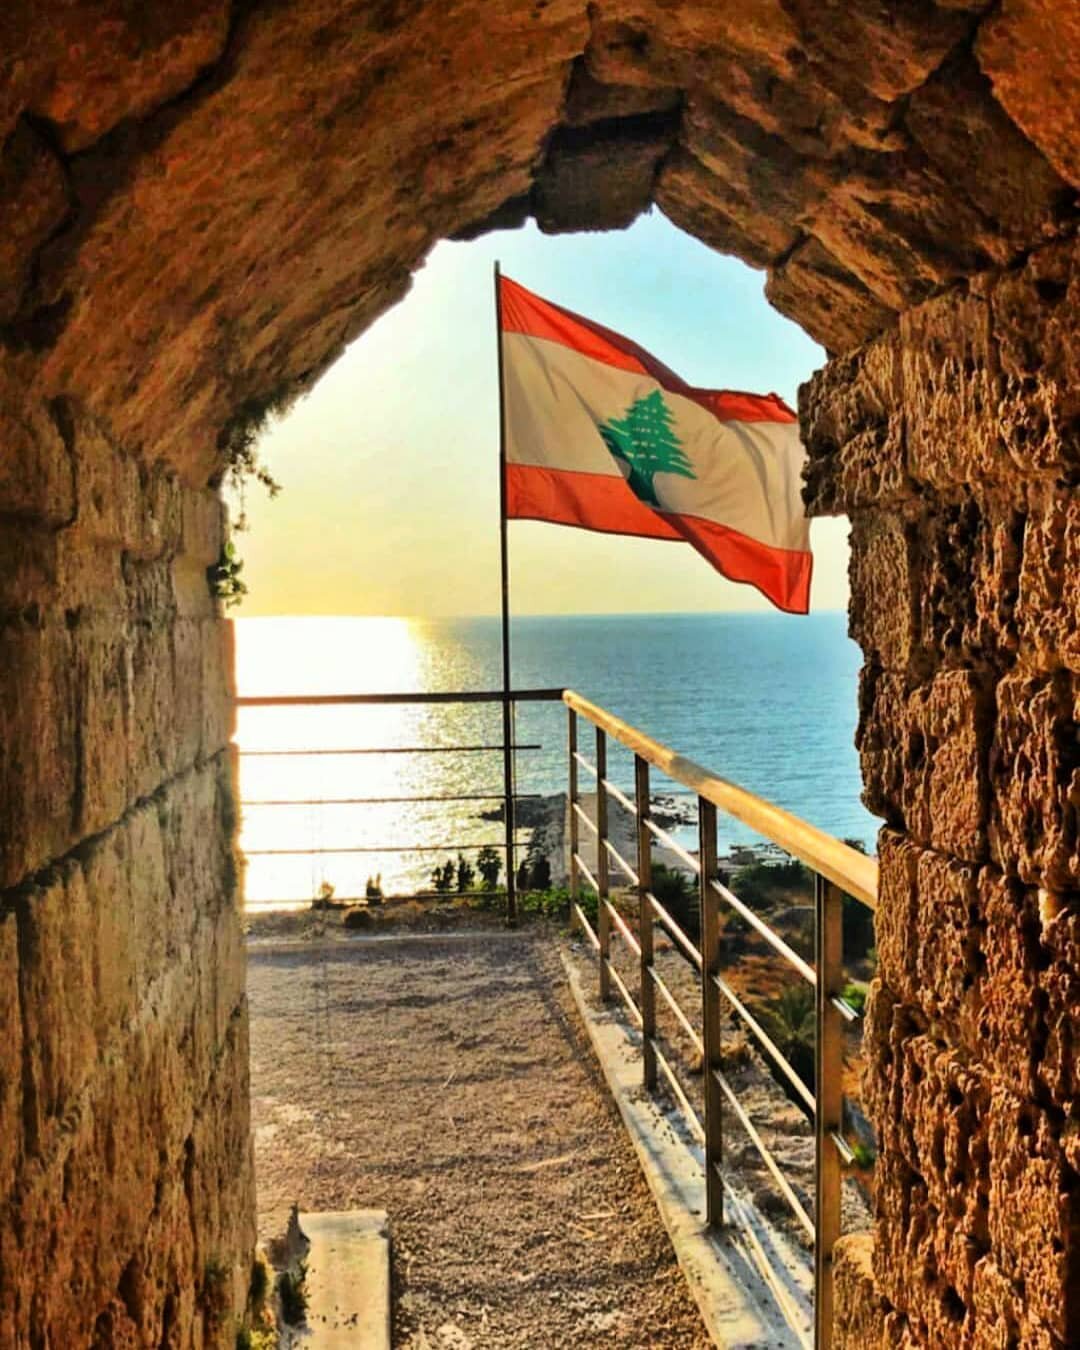 🇱🇧will rise again🇱🇧
📌 Crusader's castle, Byblos ➖➖➖➖➖➖➖➖➖➖➖➖ .
A castle from the 12th century AD built on the remains of roman and phoenician limestones.
N.B. Do not miss the roman amphitheater
.
📸: @nicolasorensen
.
Lebanon is a country rich i